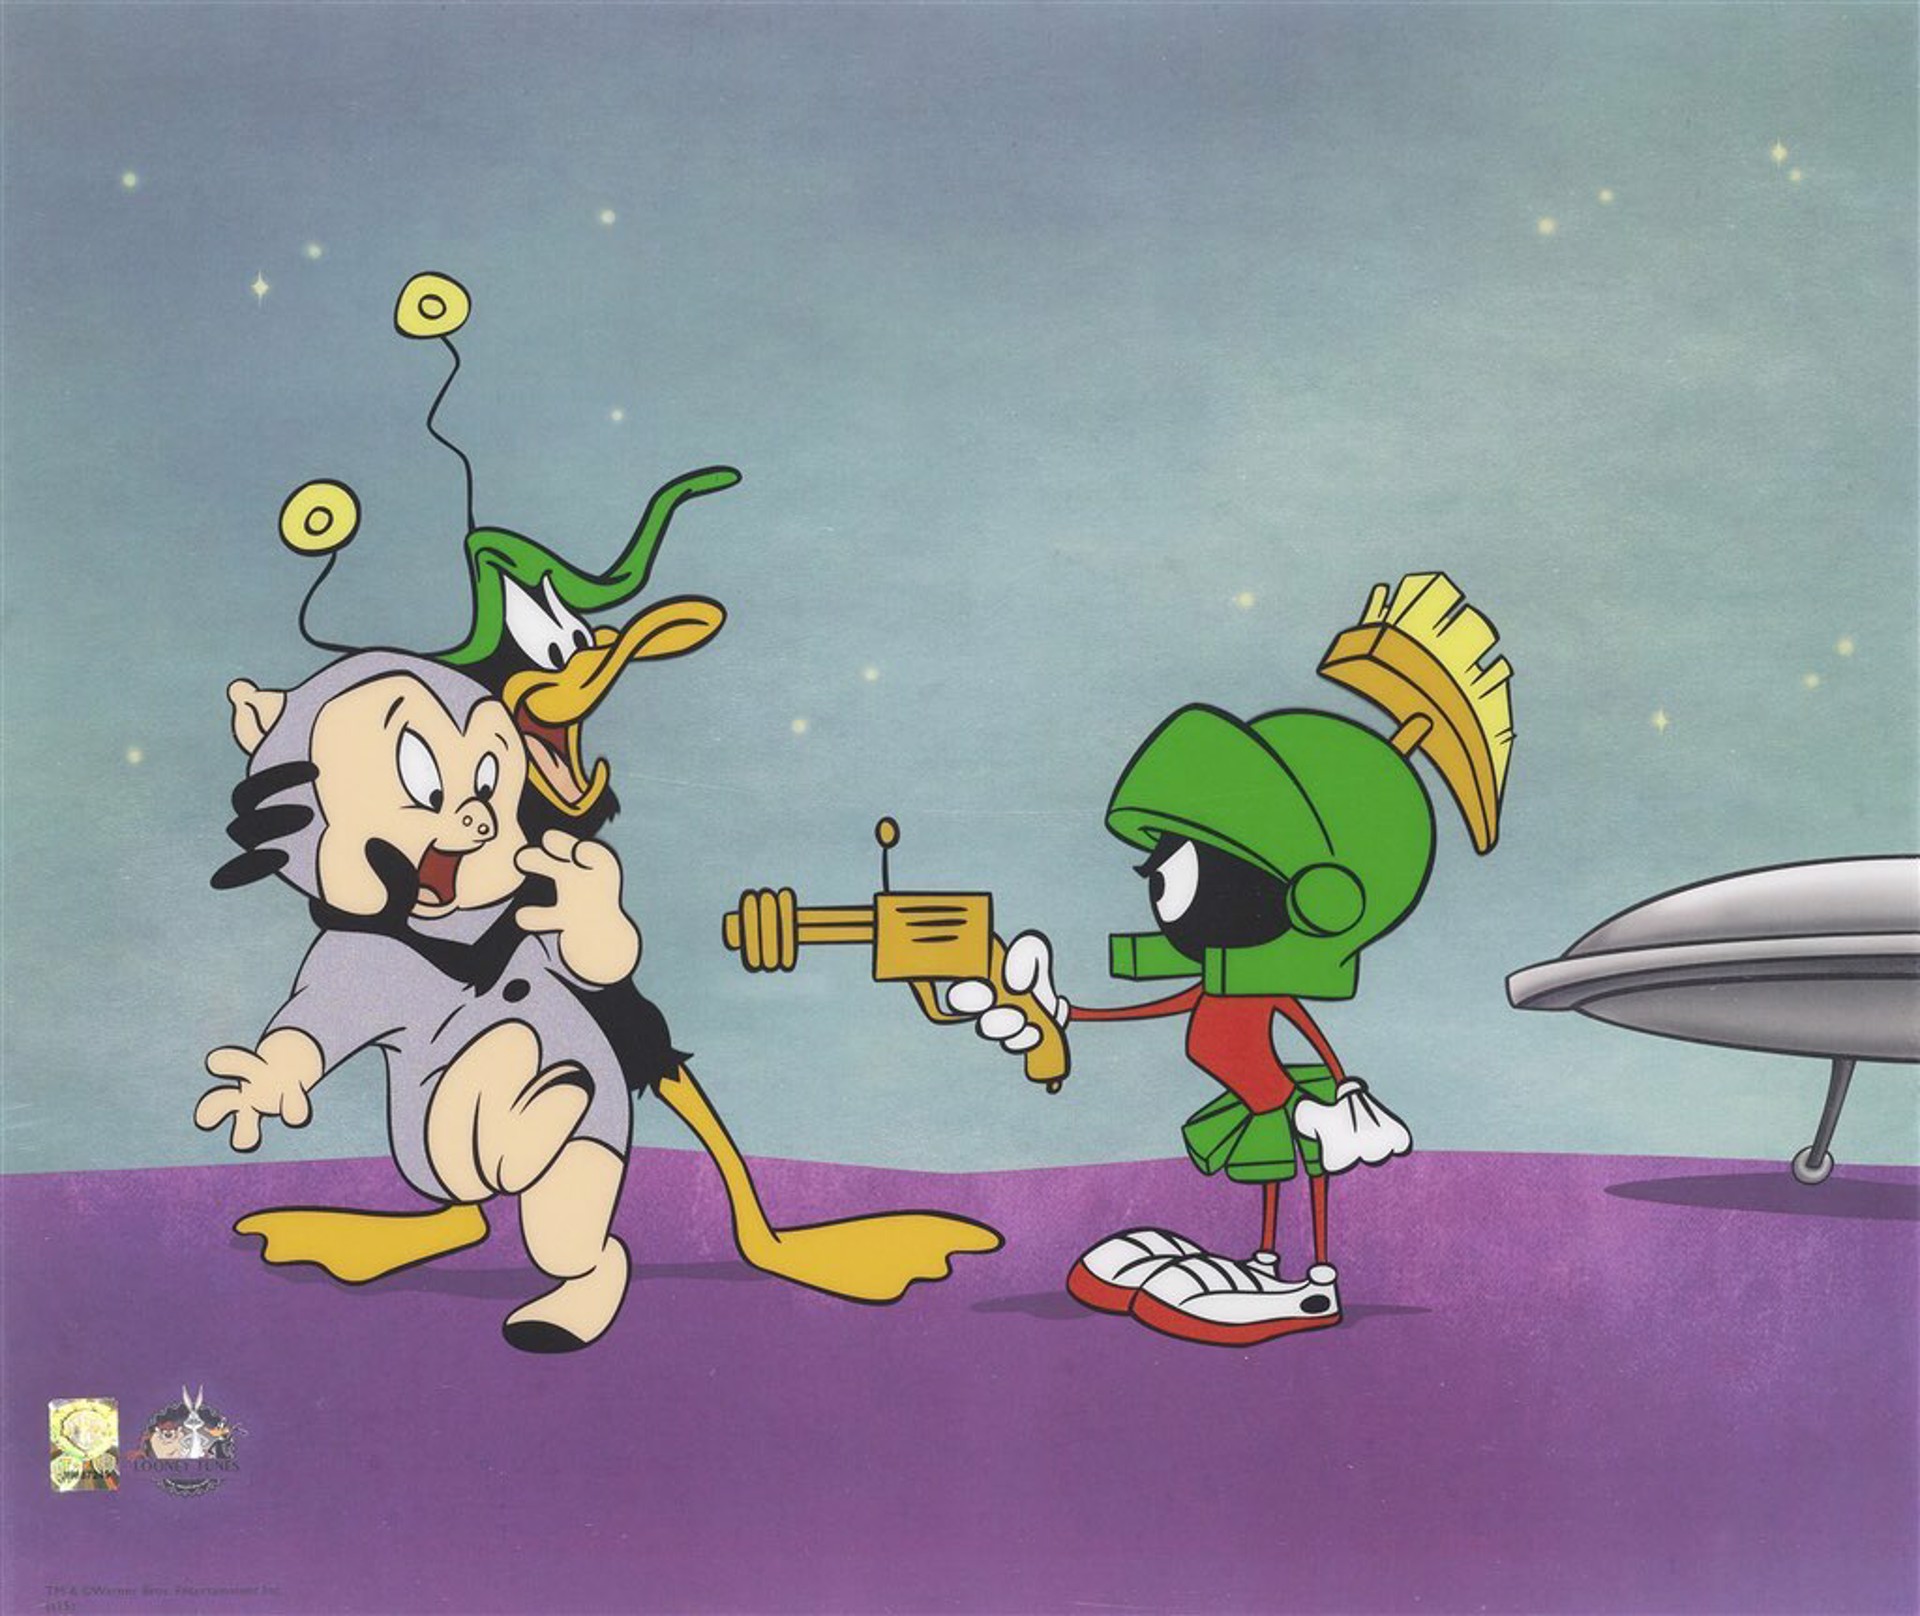 Marvin the Martian X Louis Vuitton Canvas Painting